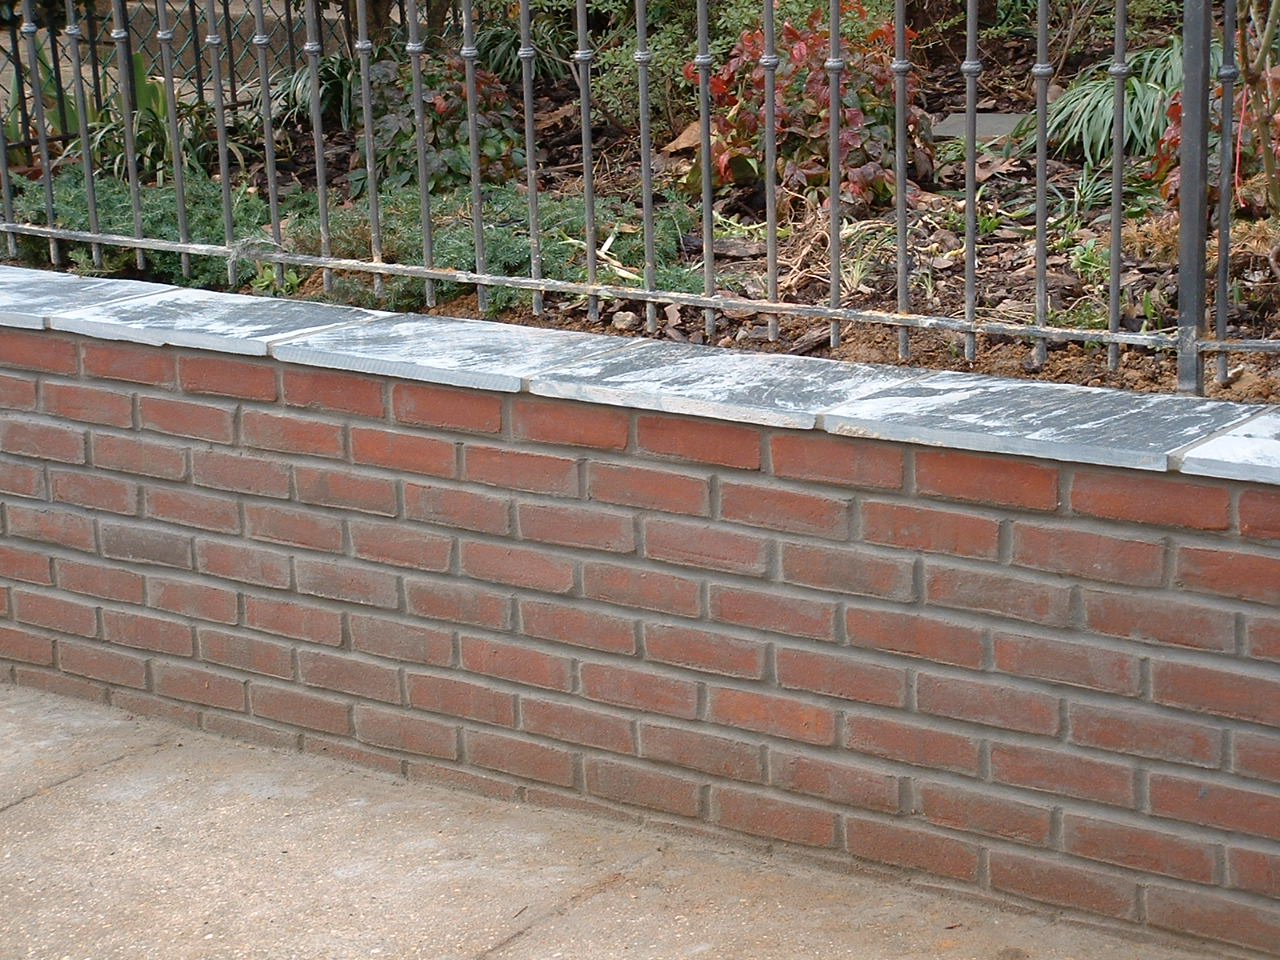 How to Preserve Your Old Brick Retaining Wall